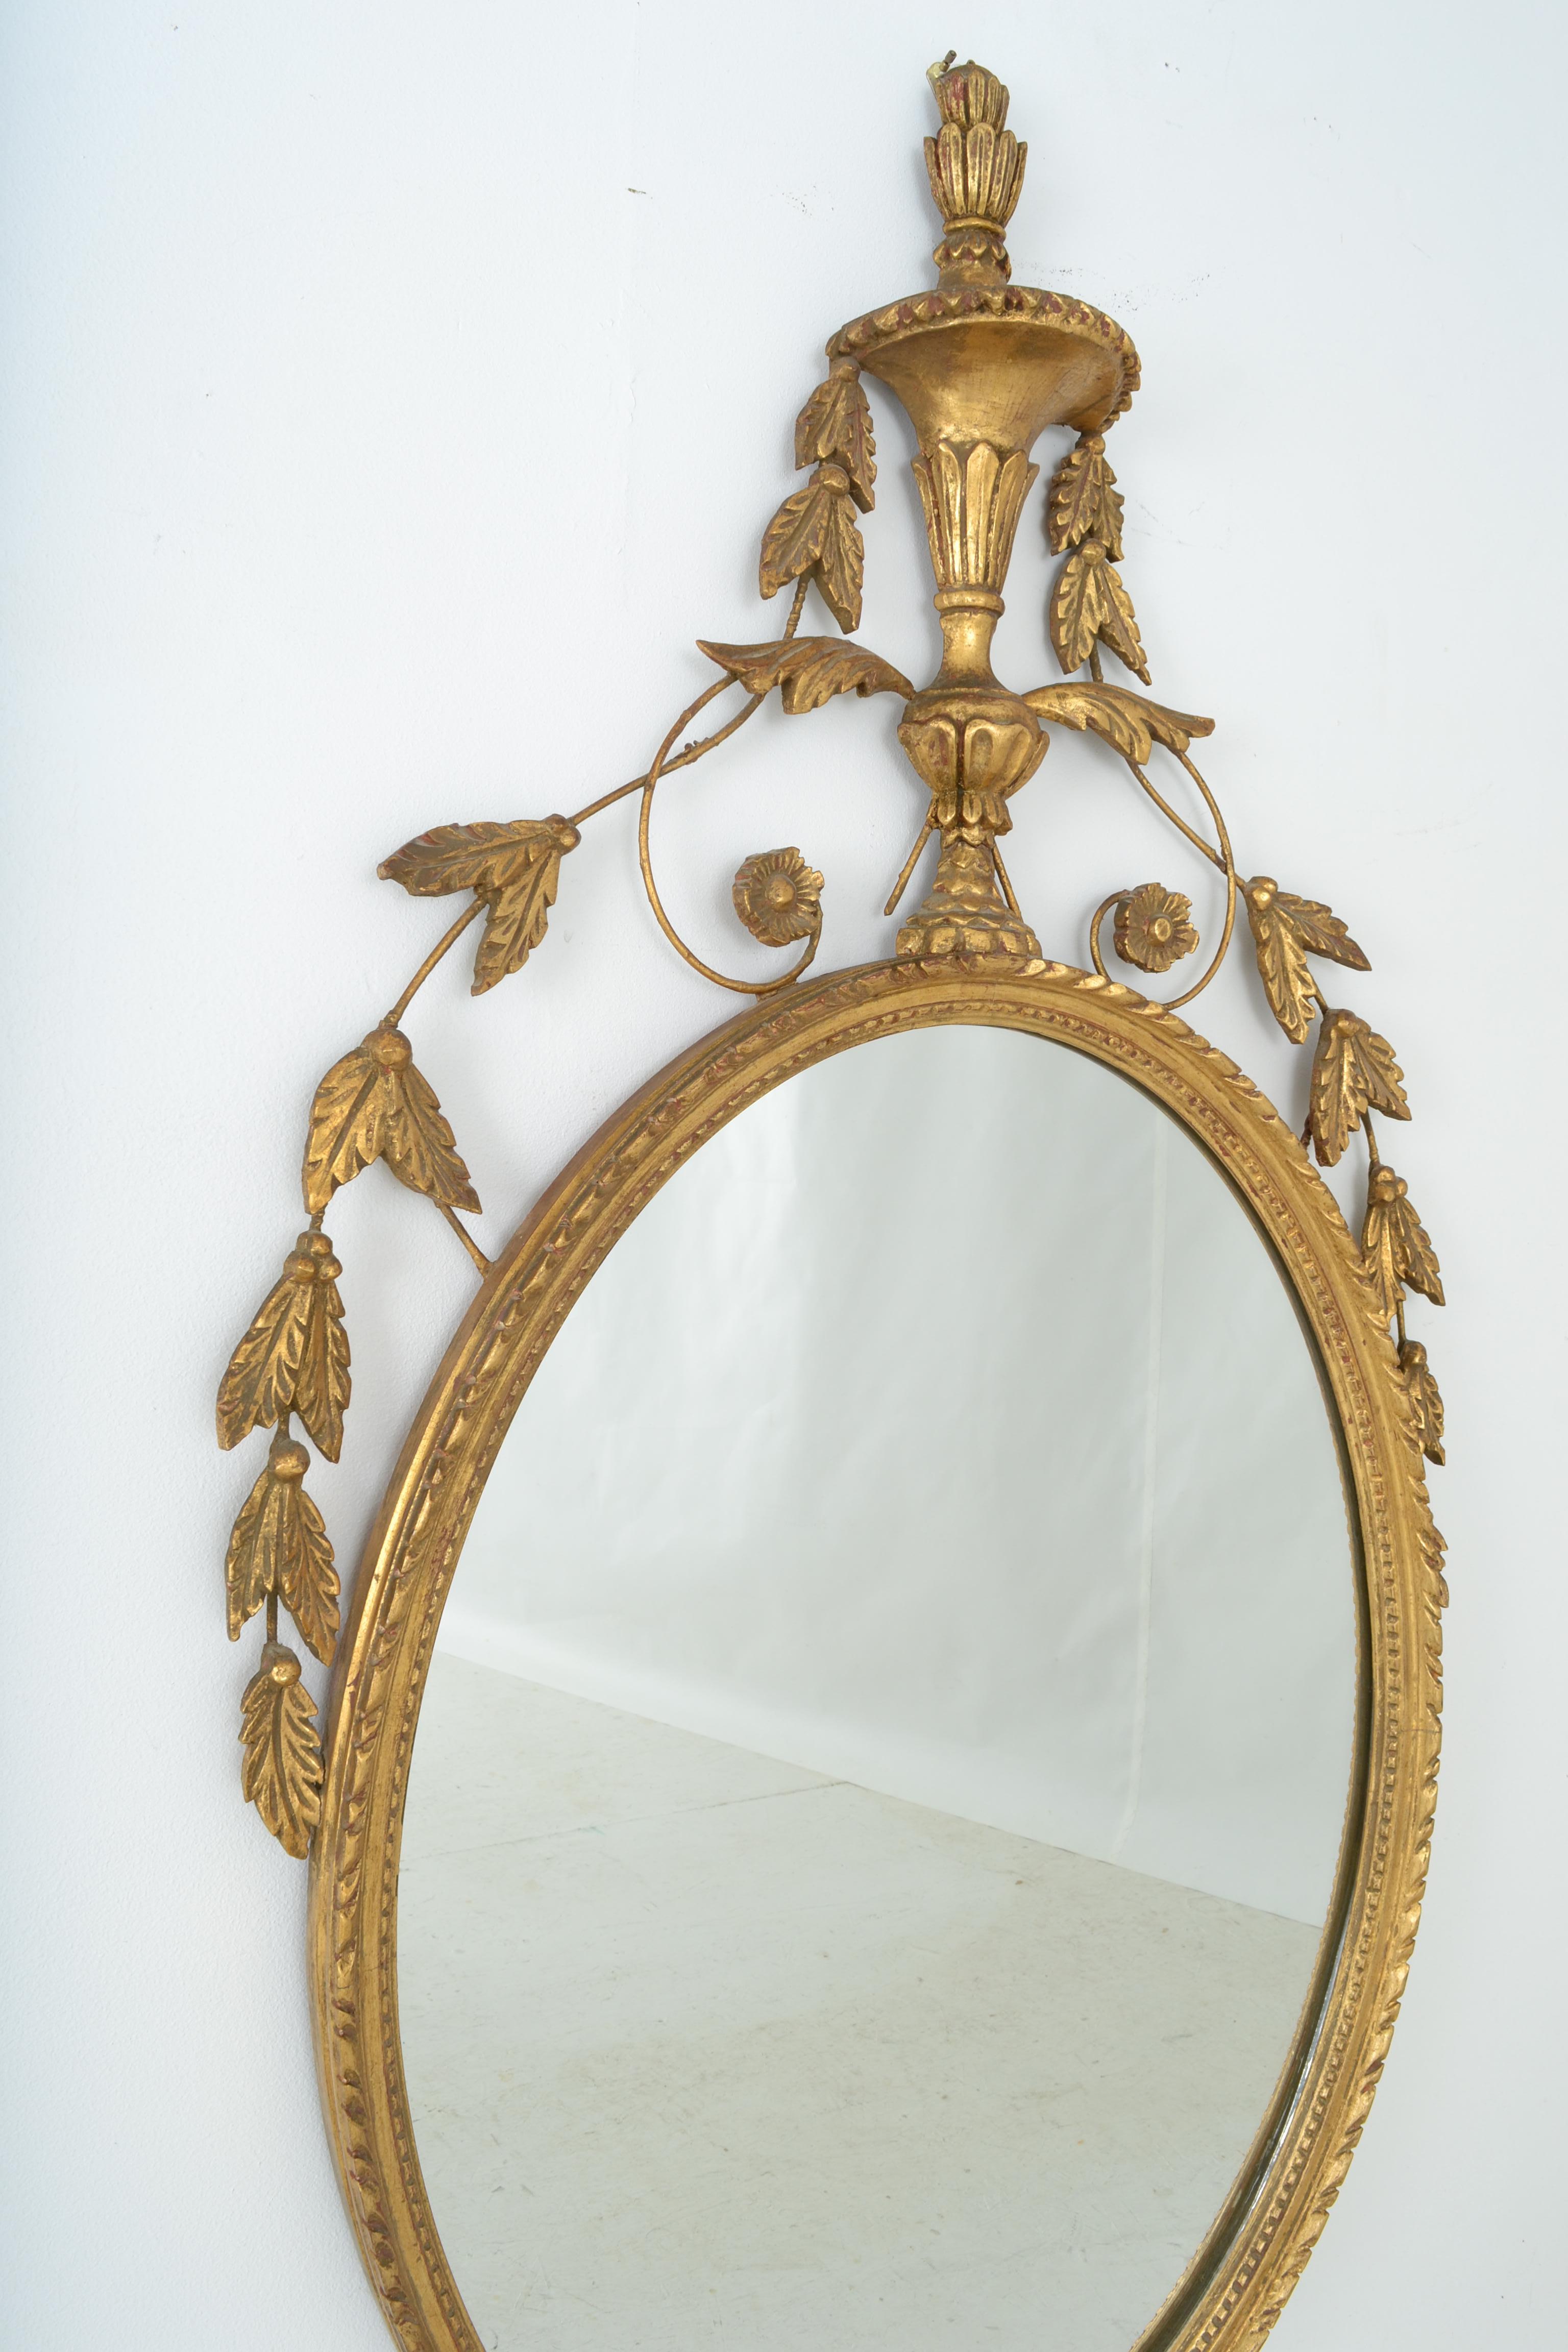 A fine quality mirror featuring hand carved giltwood. Very fine condition showing almost no wear. No chips or scratches.